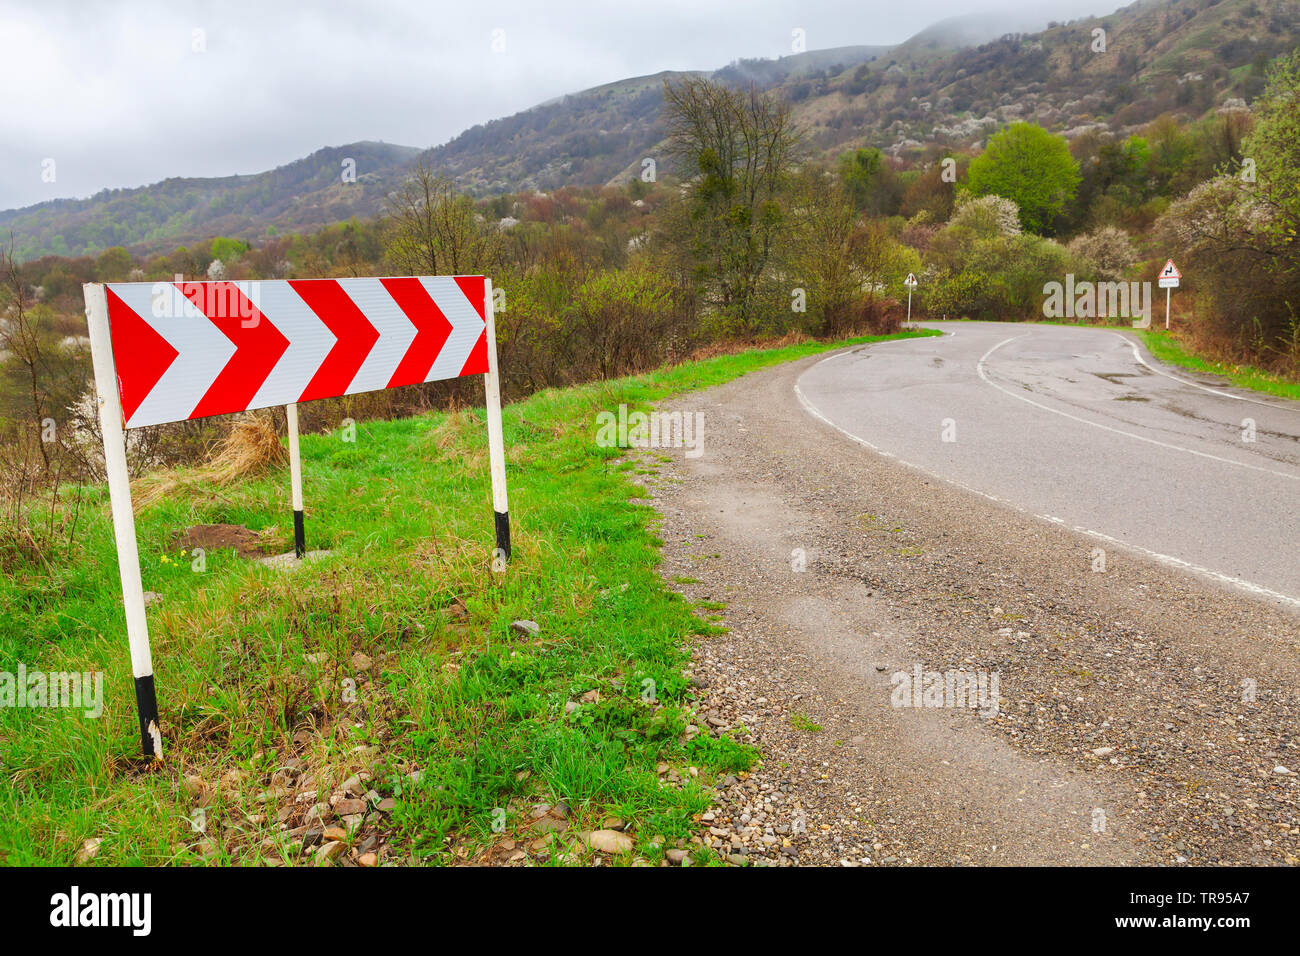 Dangerous Turn Red And White Striped Arrow Road Sign Mounted On A Roadside Of A Mountain Road Stock Photo Alamy